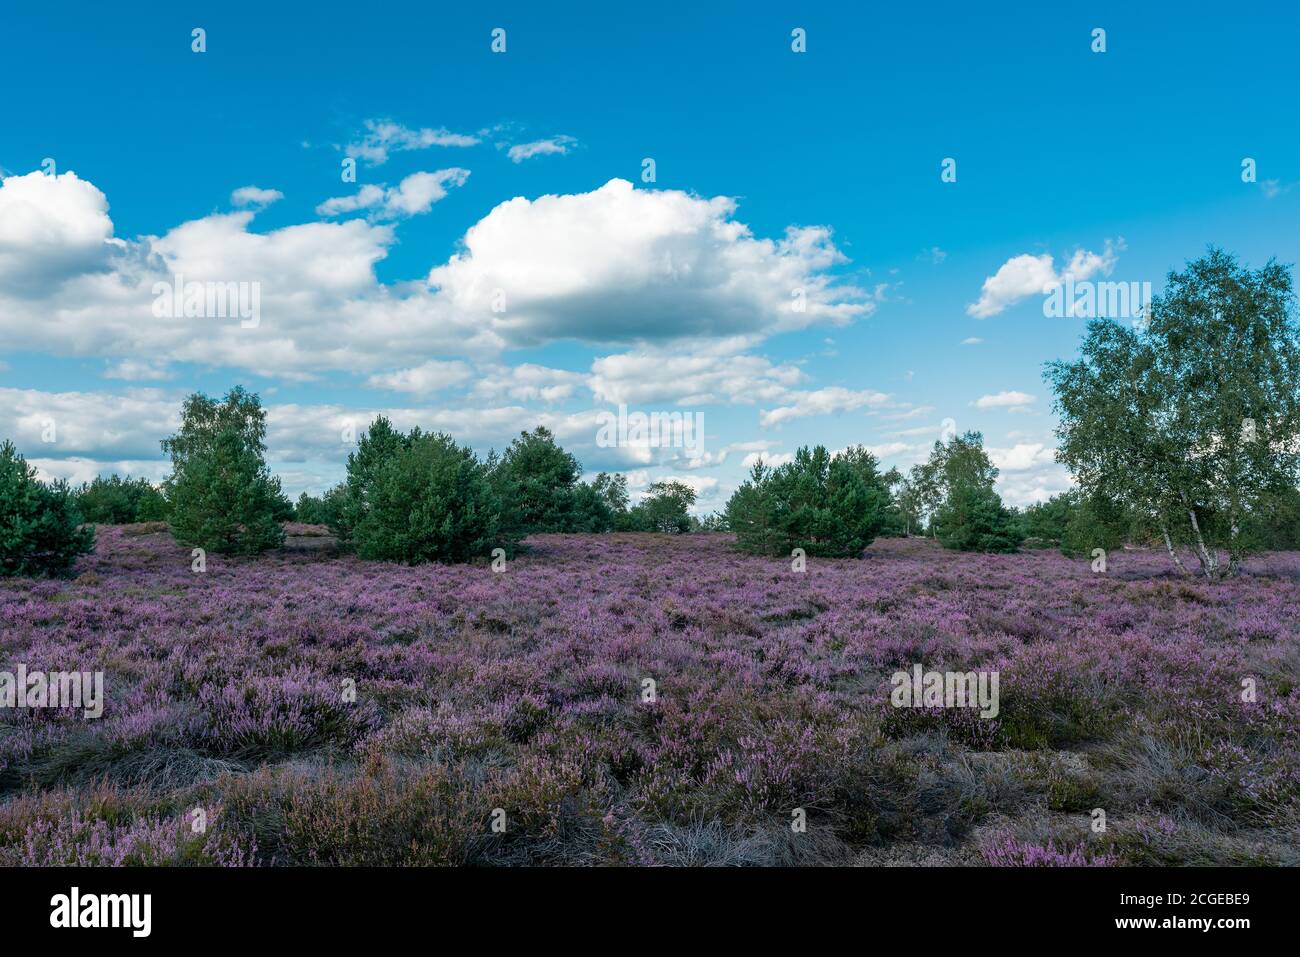 Scenic panorama of a german heather landscape in autumn with purple flowering erica plants, birches and a dramatic cloudy sky Stock Photo